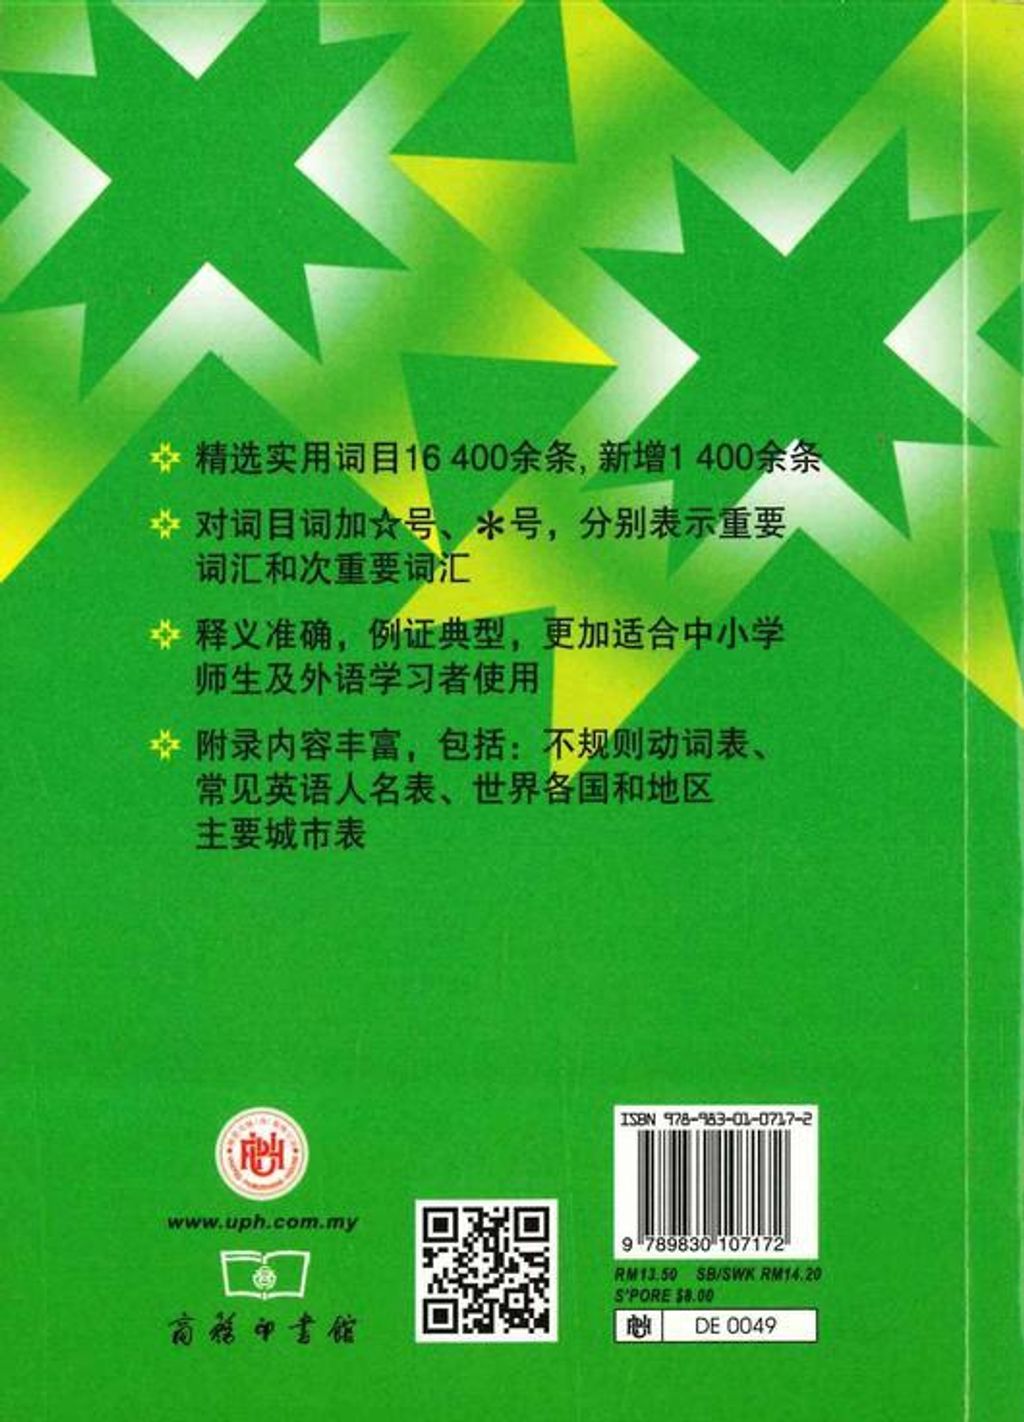 A_JUNIOR_ENG-CHINESE_DICTIONARY_2_530x.jpg